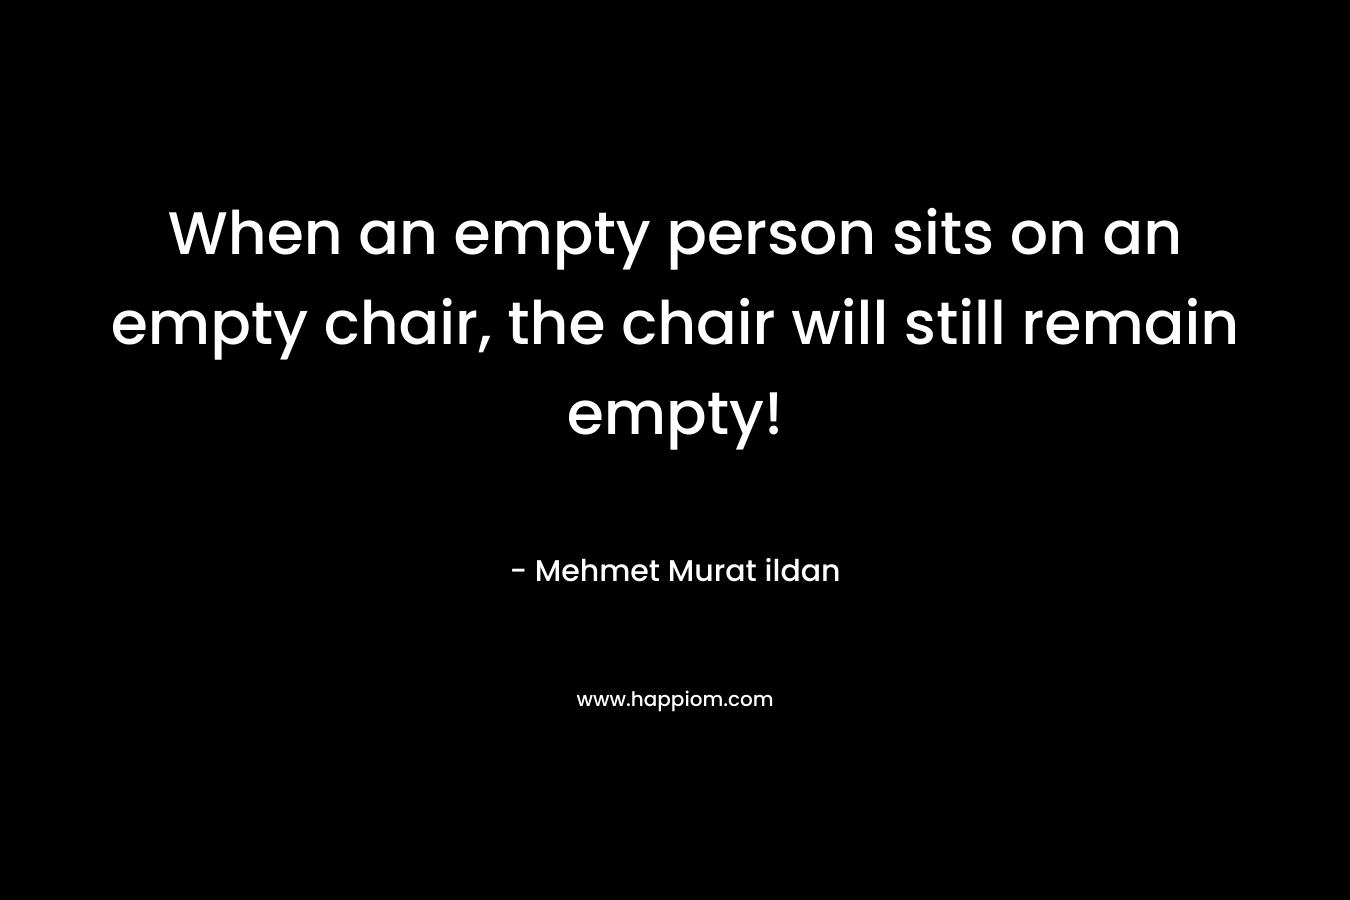 When an empty person sits on an empty chair, the chair will still remain empty!